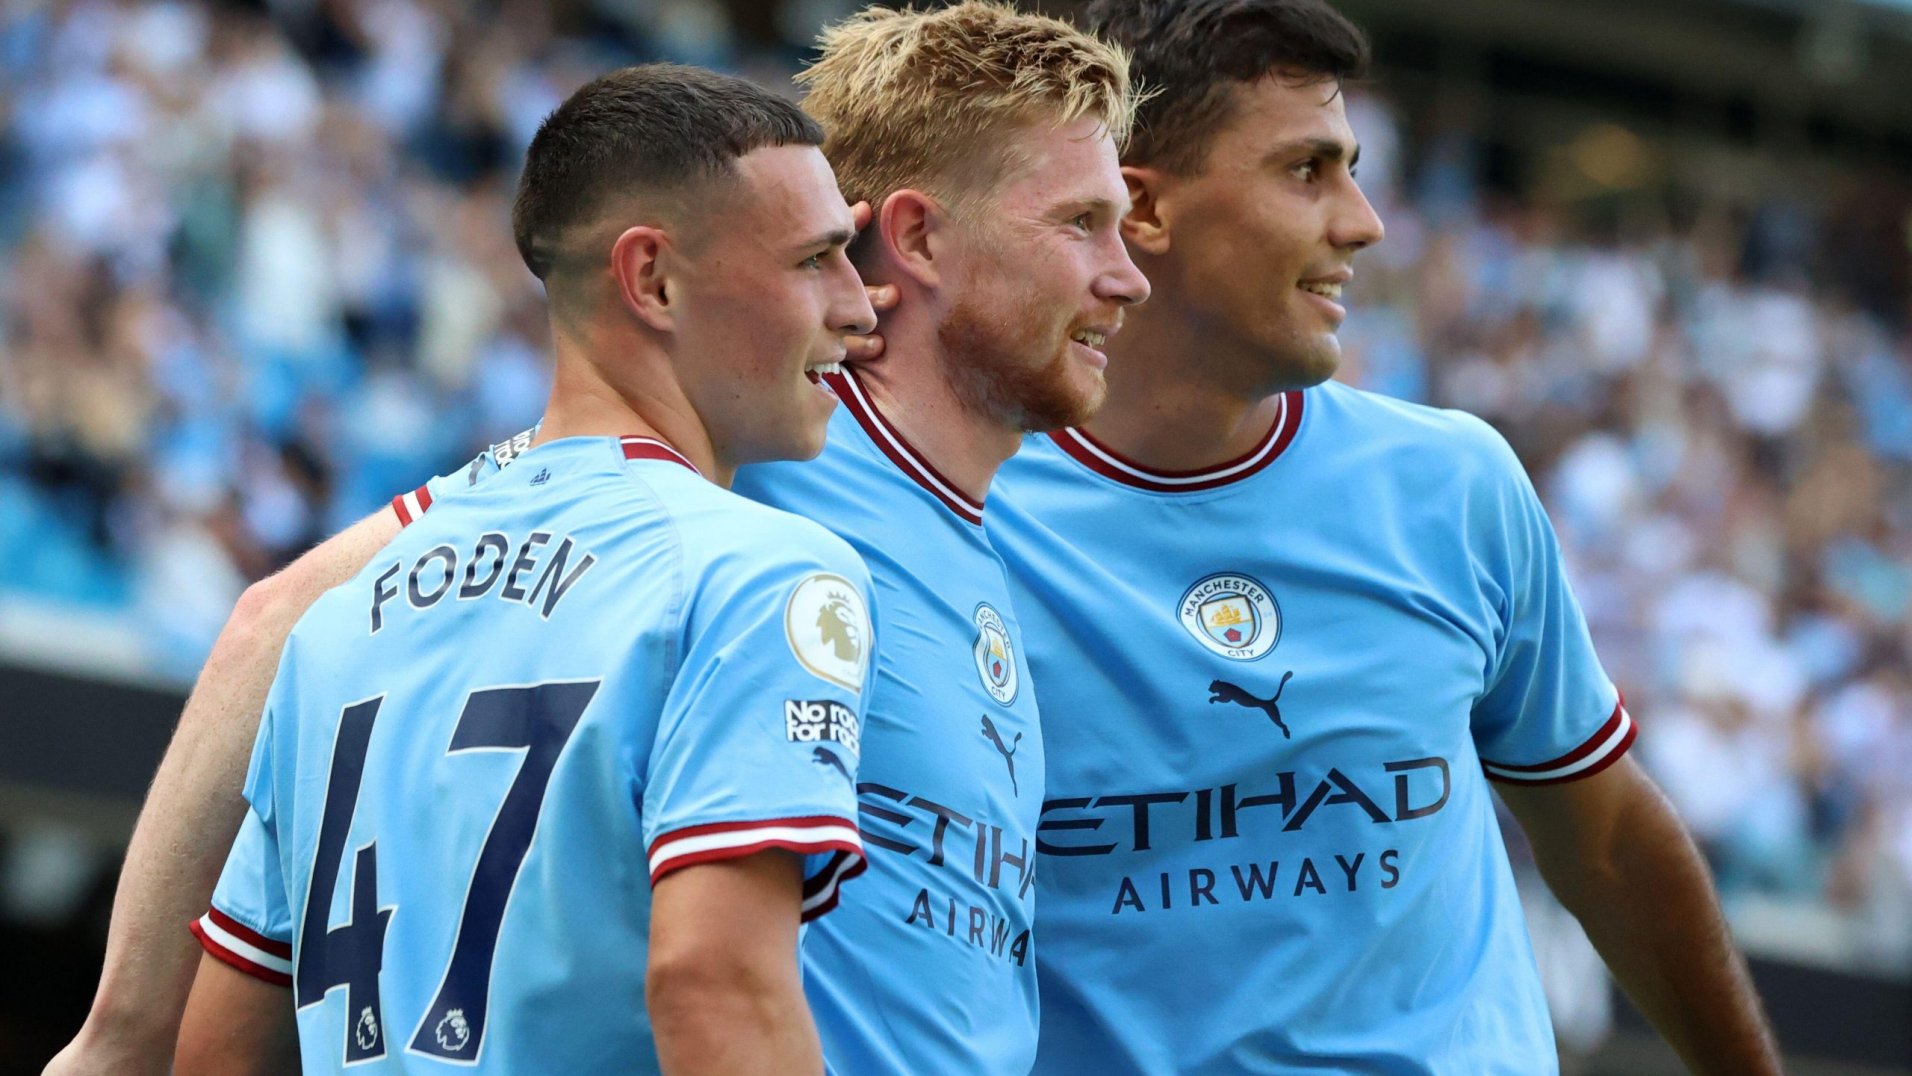  Rodri, Declan Rice, and Kevin De Bruyne are all pictured smiling while playing soccer for Manchester City.